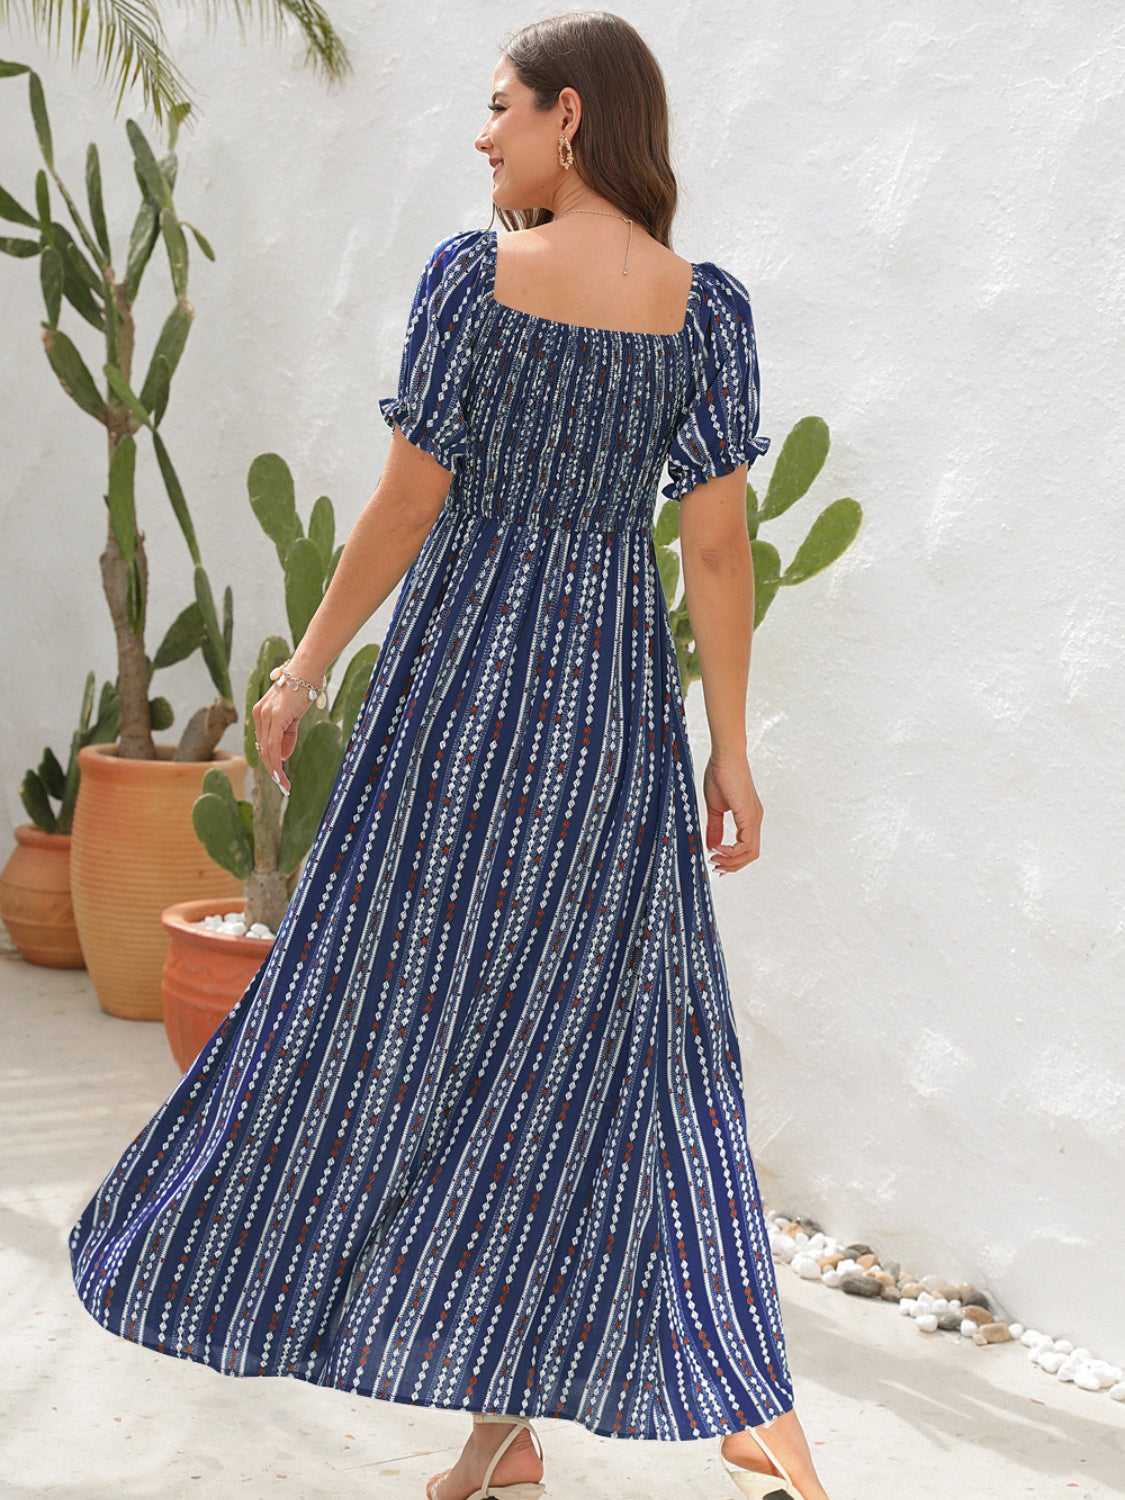 Elegant Mexico Wedding Guest Dresses: Stylish Slit Printed Short Sleeve Dress for Memorable Celebrations – Perfect for Beach or Garden Venues